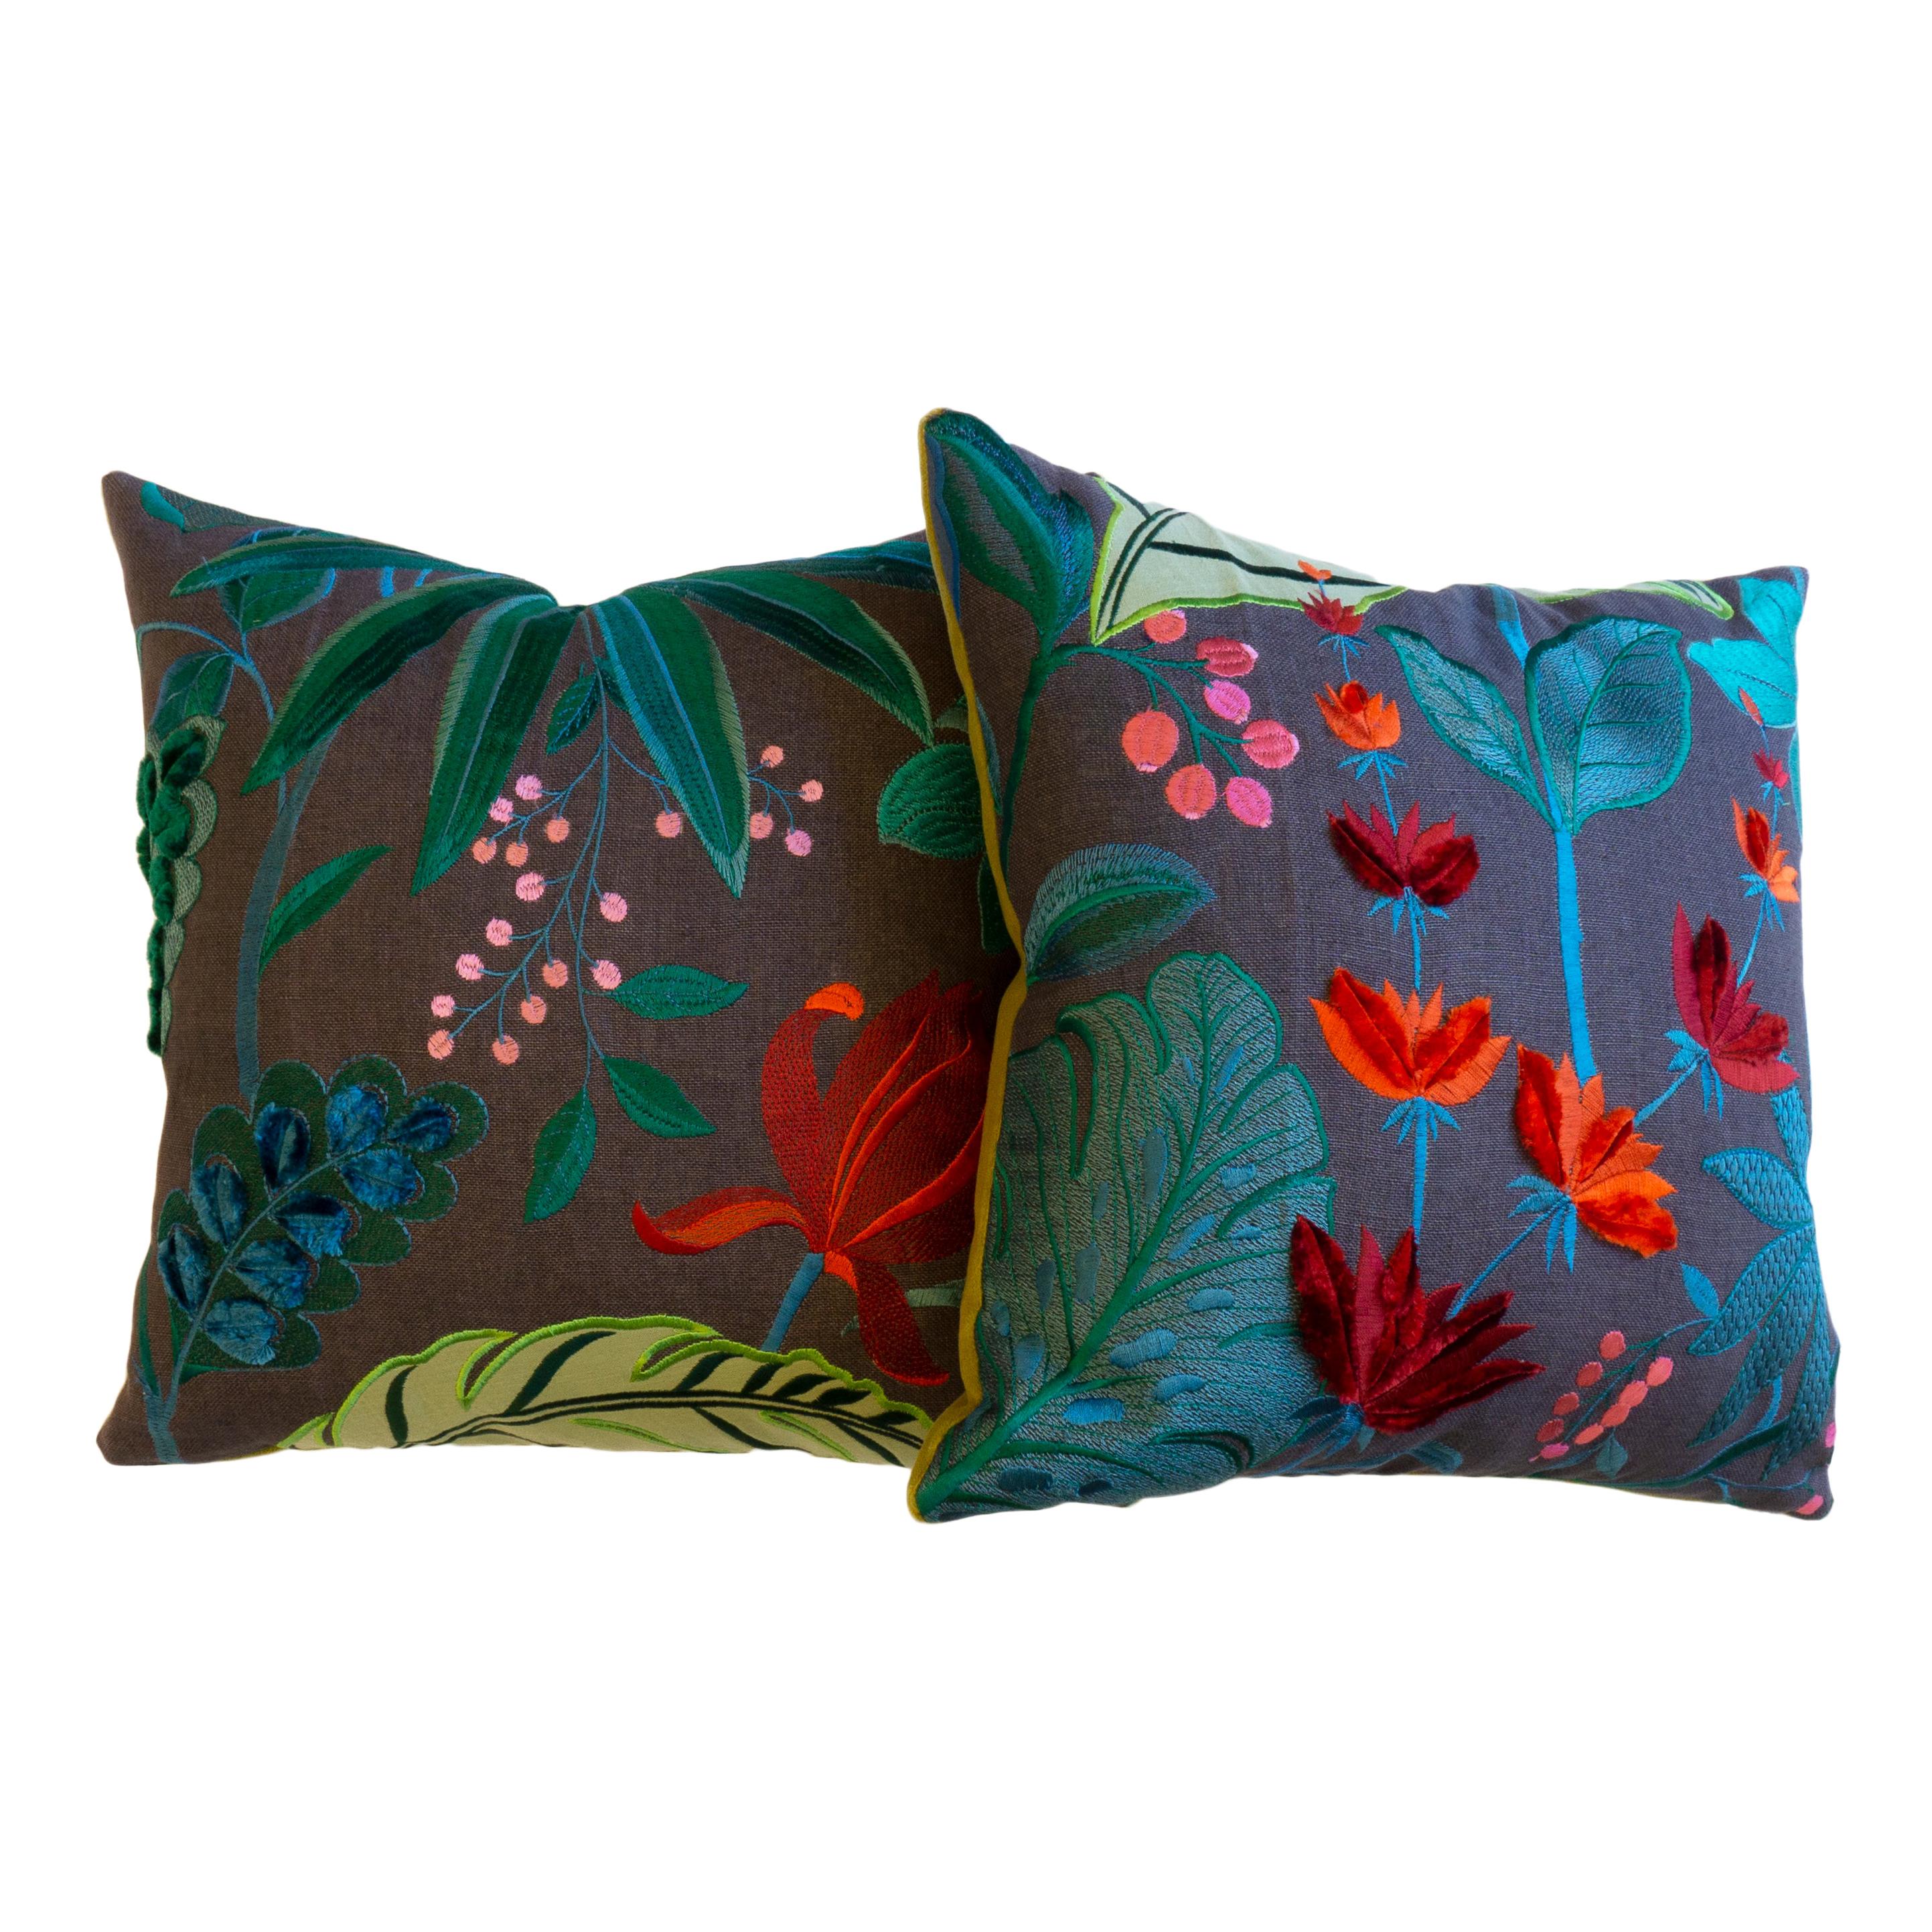 Floridita Throw Pillows with Floral Embroidery